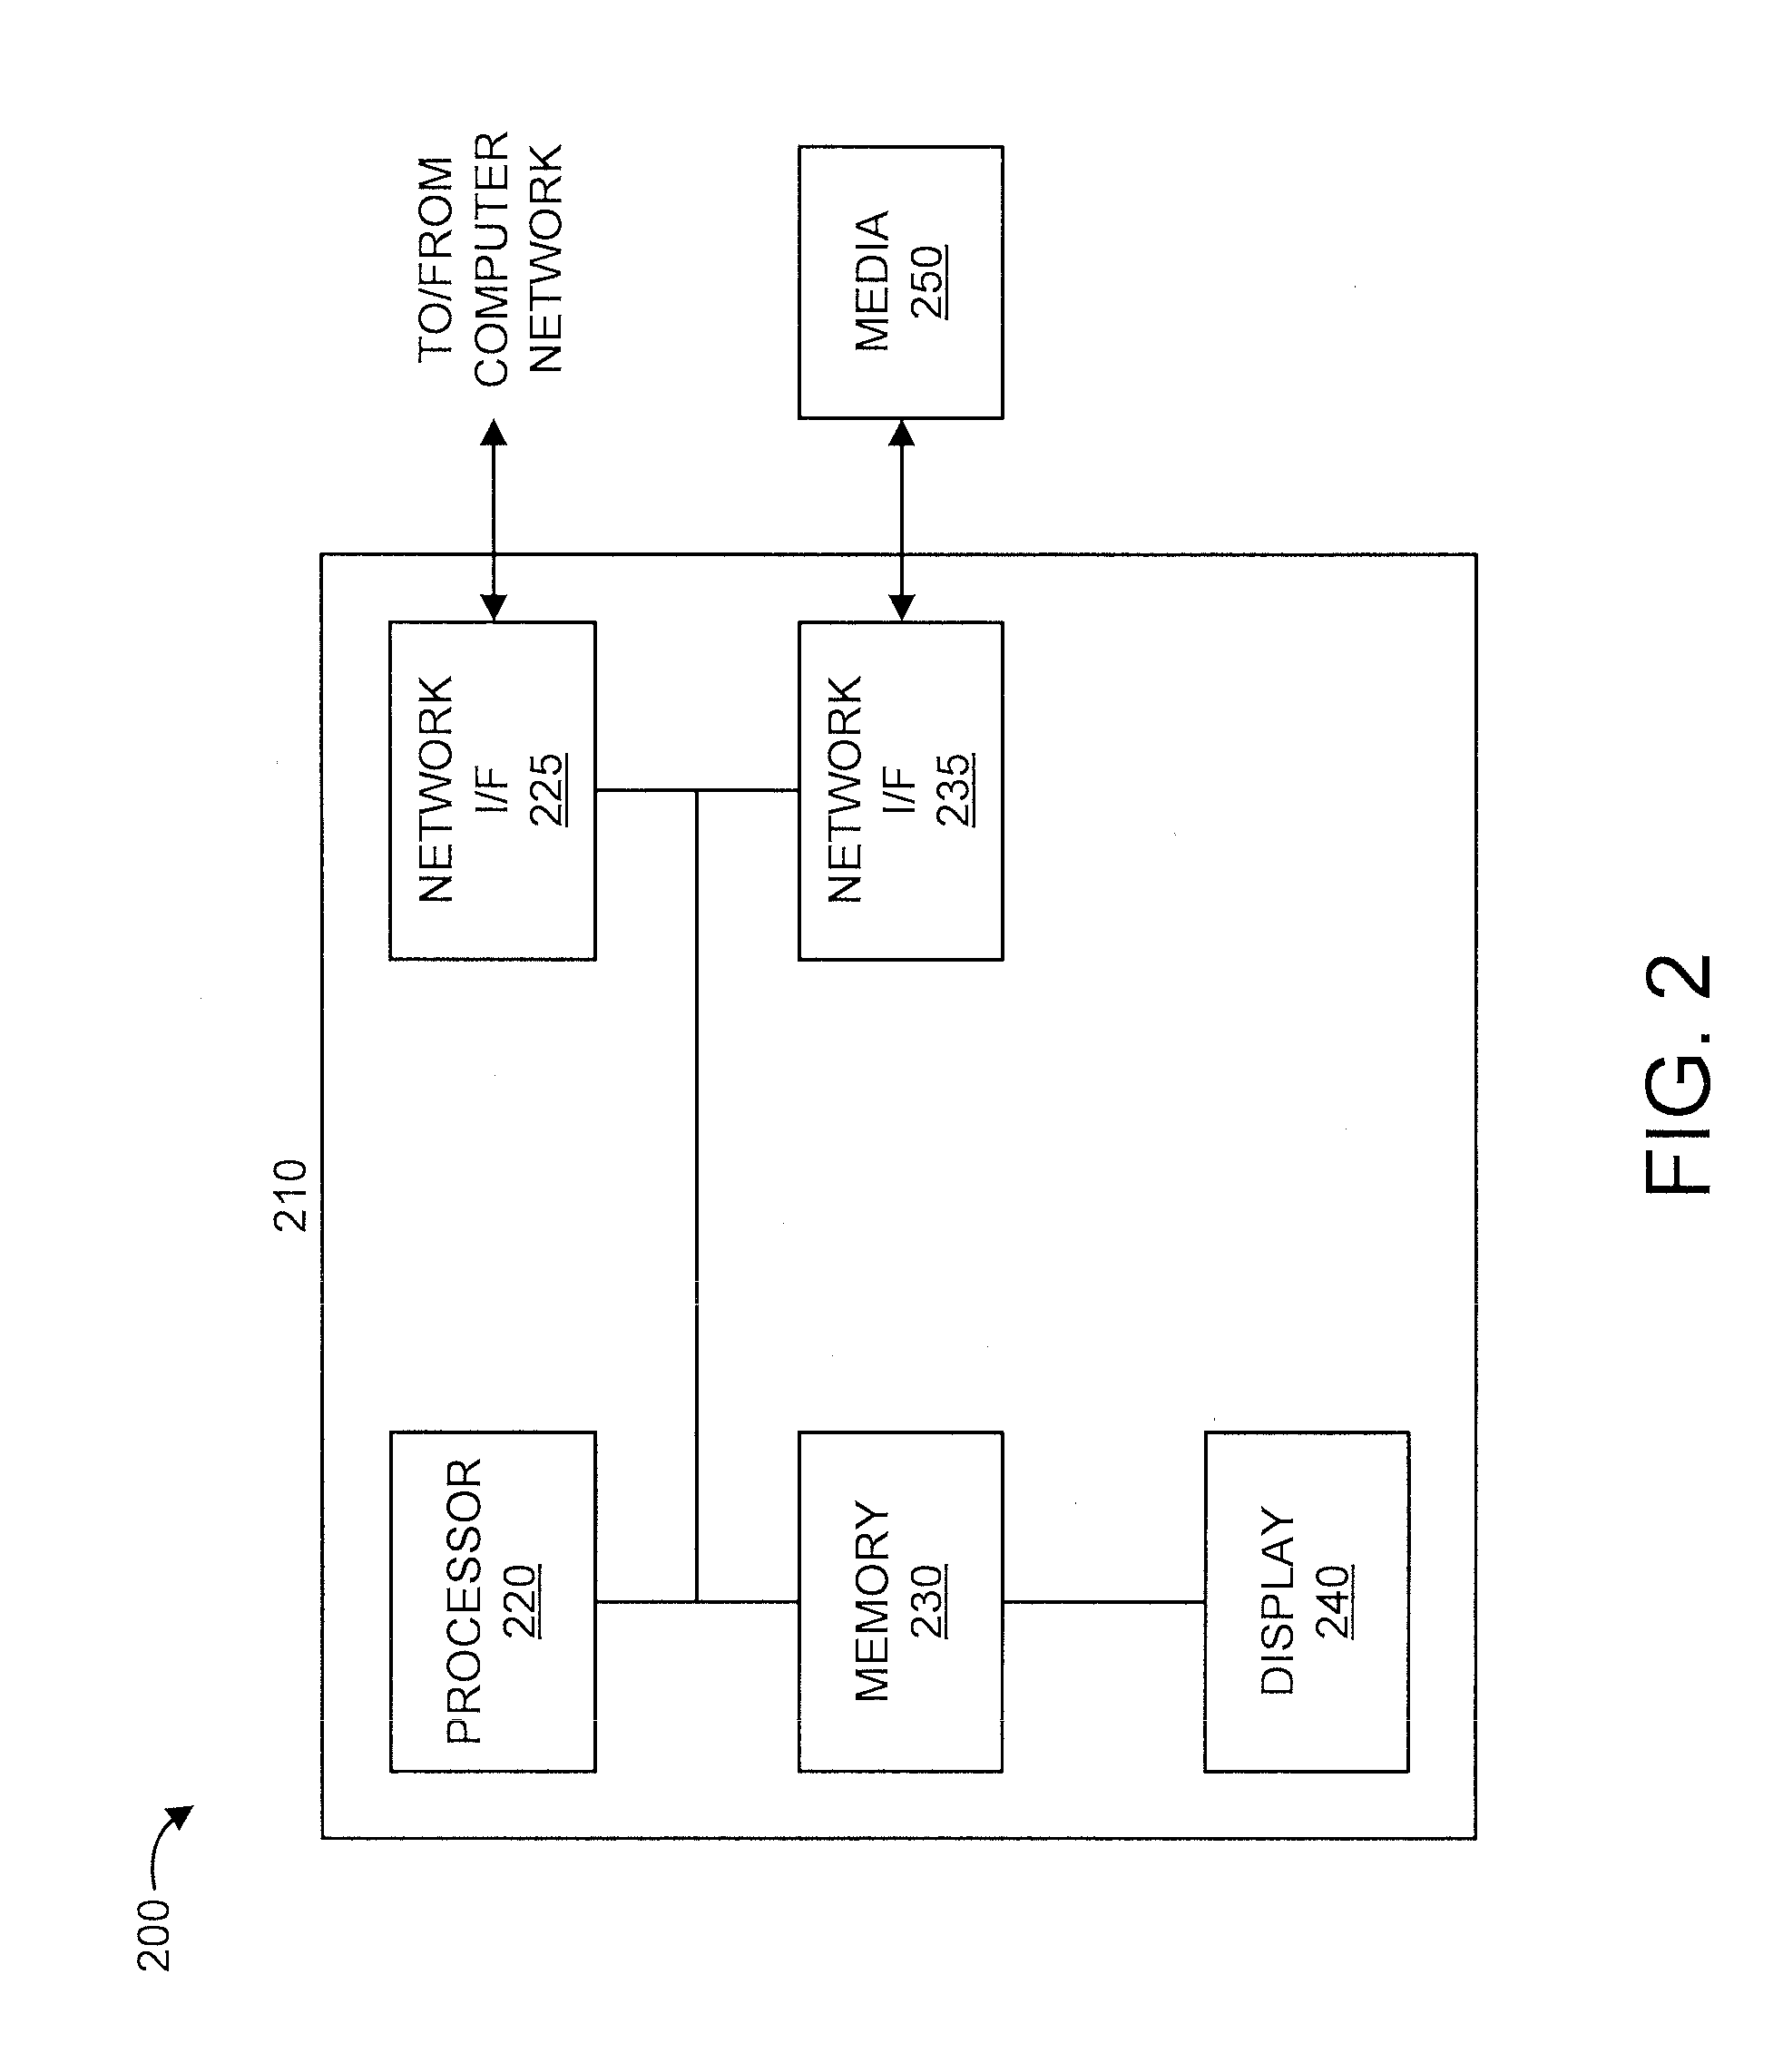 Enhanced parameter tuning for very-large-scale integration synthesis